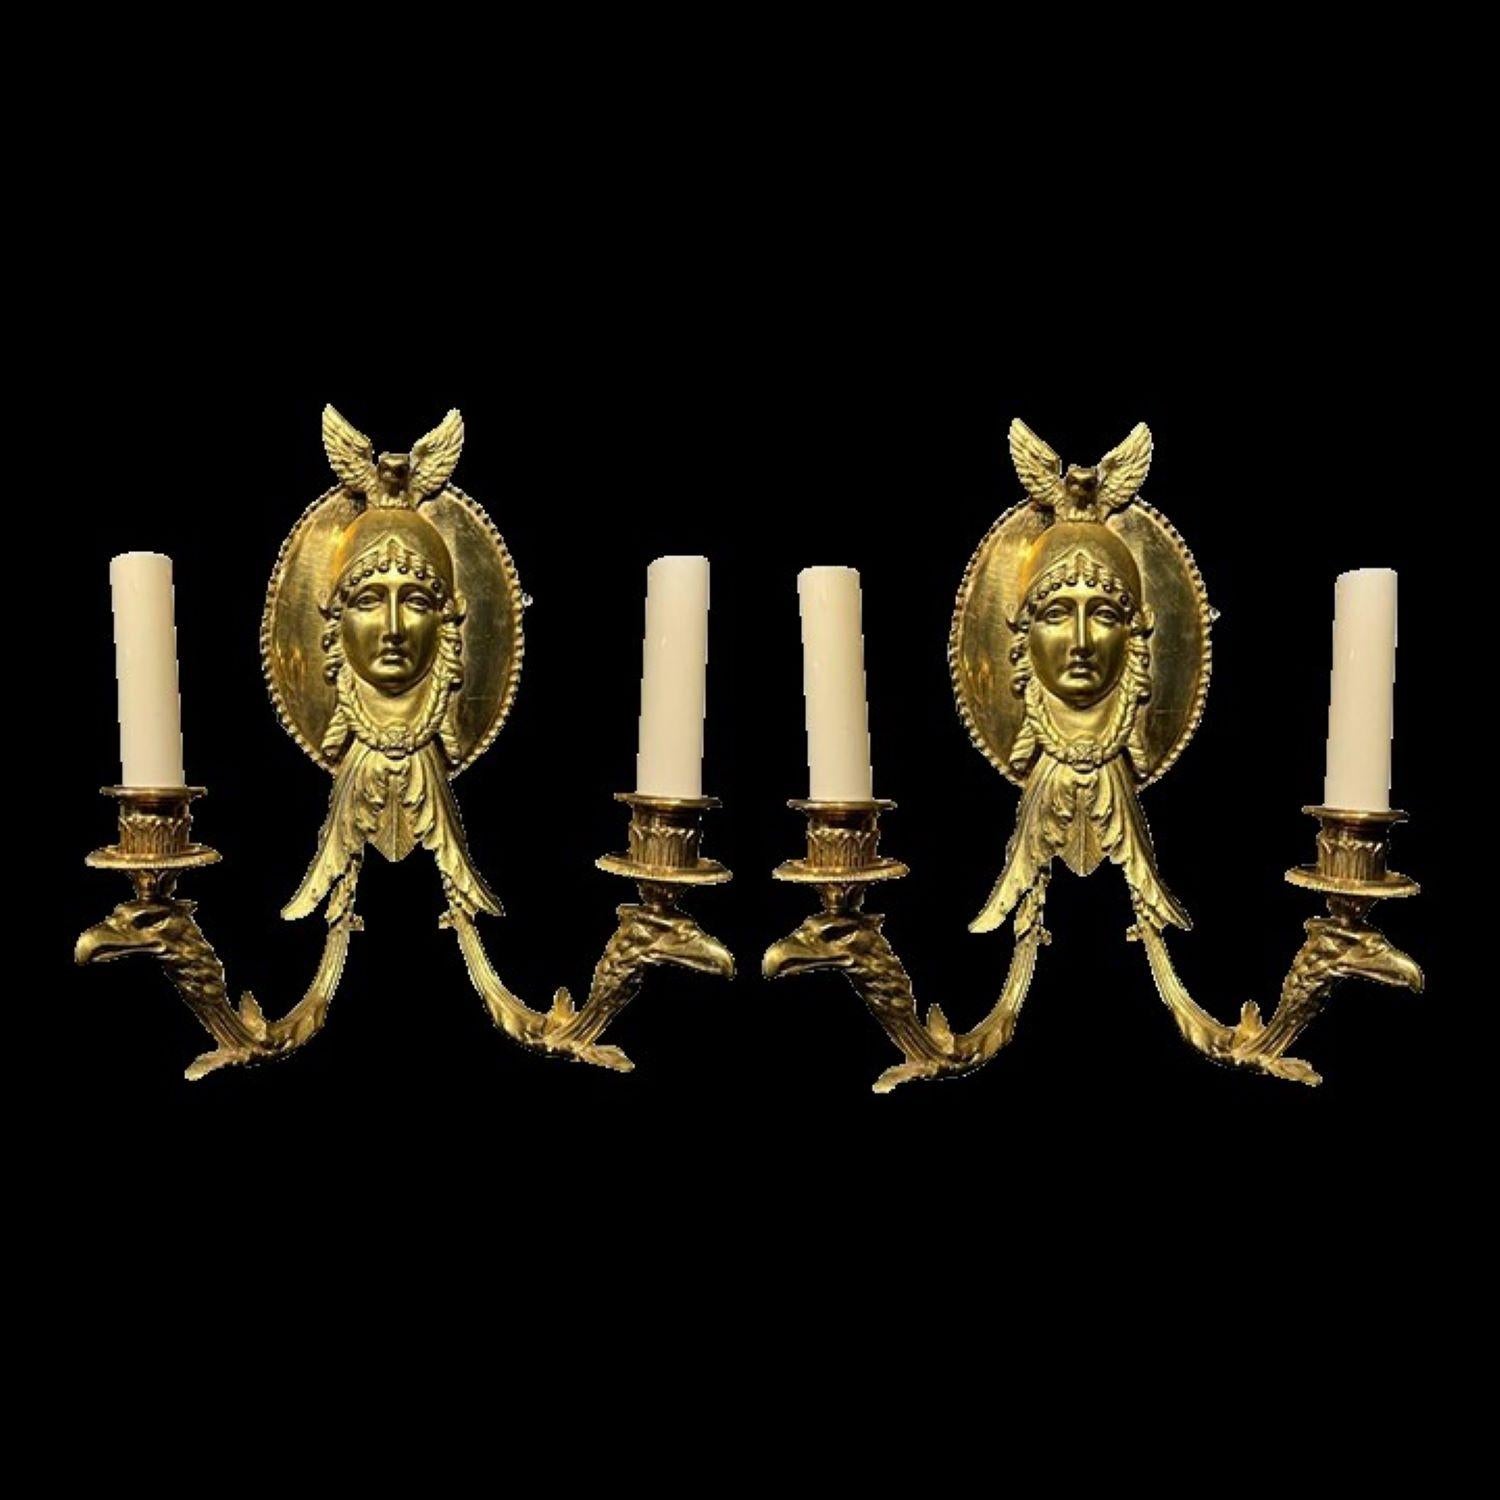 A pair of circa late 19th century French Empire sconces with eagle's heads and woman's faces. Original finish and patina, *8 available